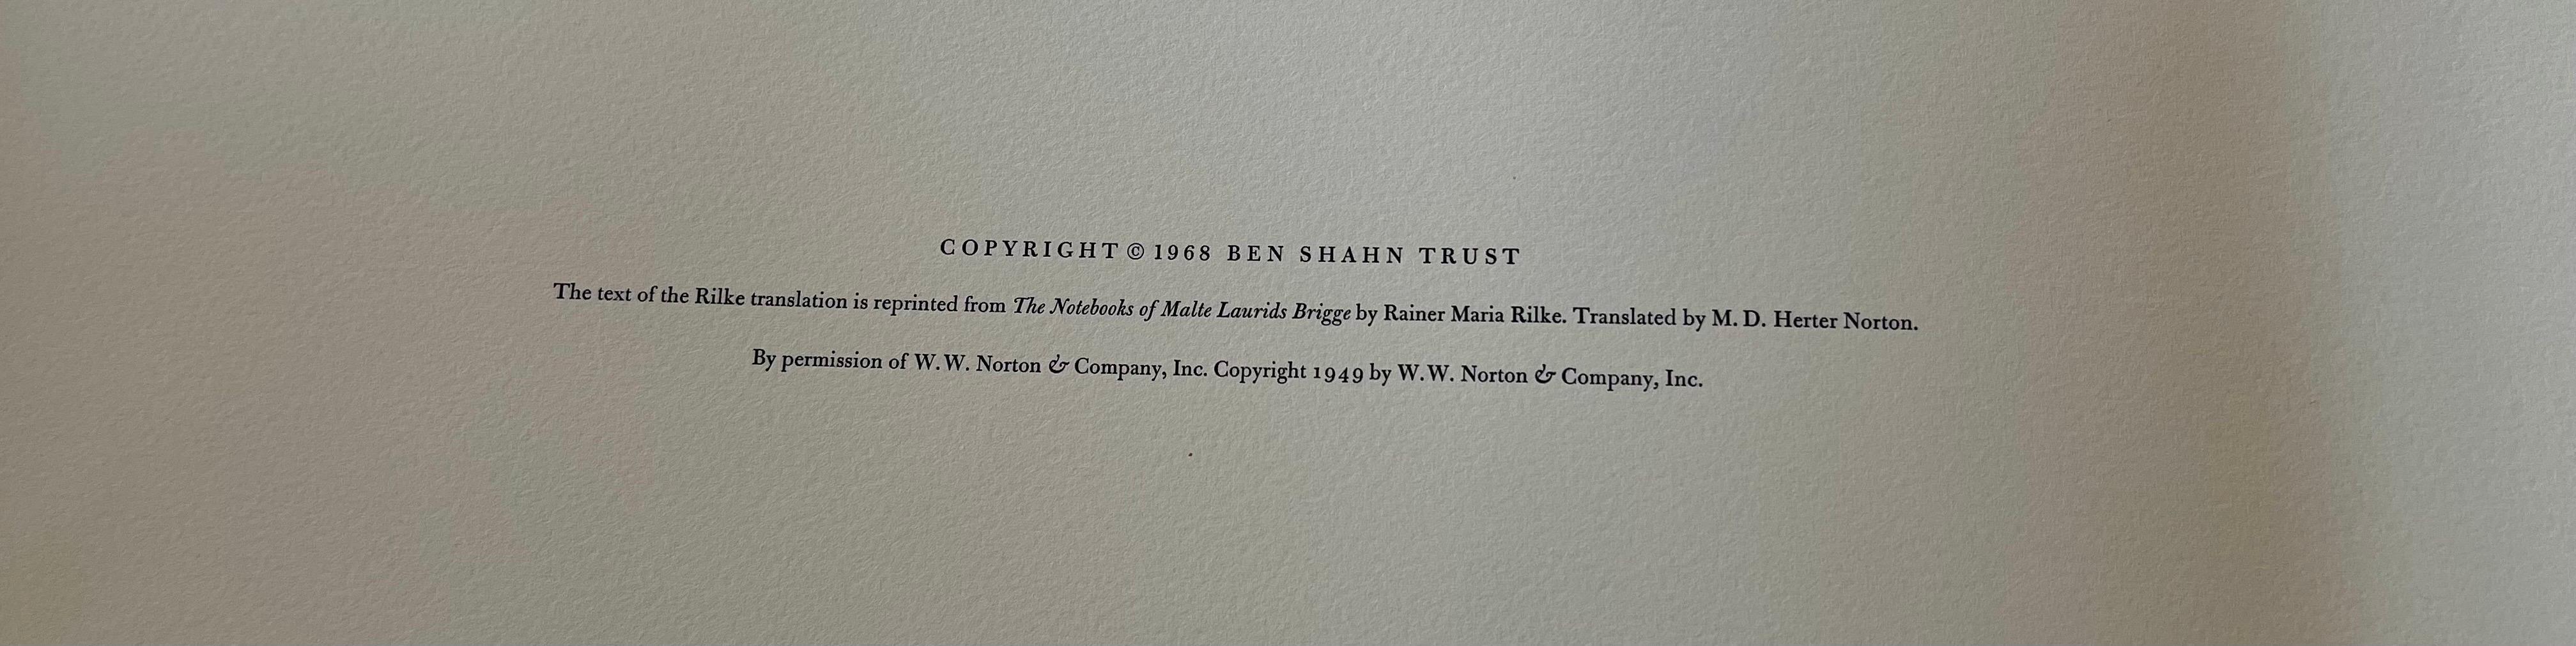 Coveted Ben Shahn Limited Edition Portfolio #234 with 24 Lithographs R. M. Rilke For Sale 2